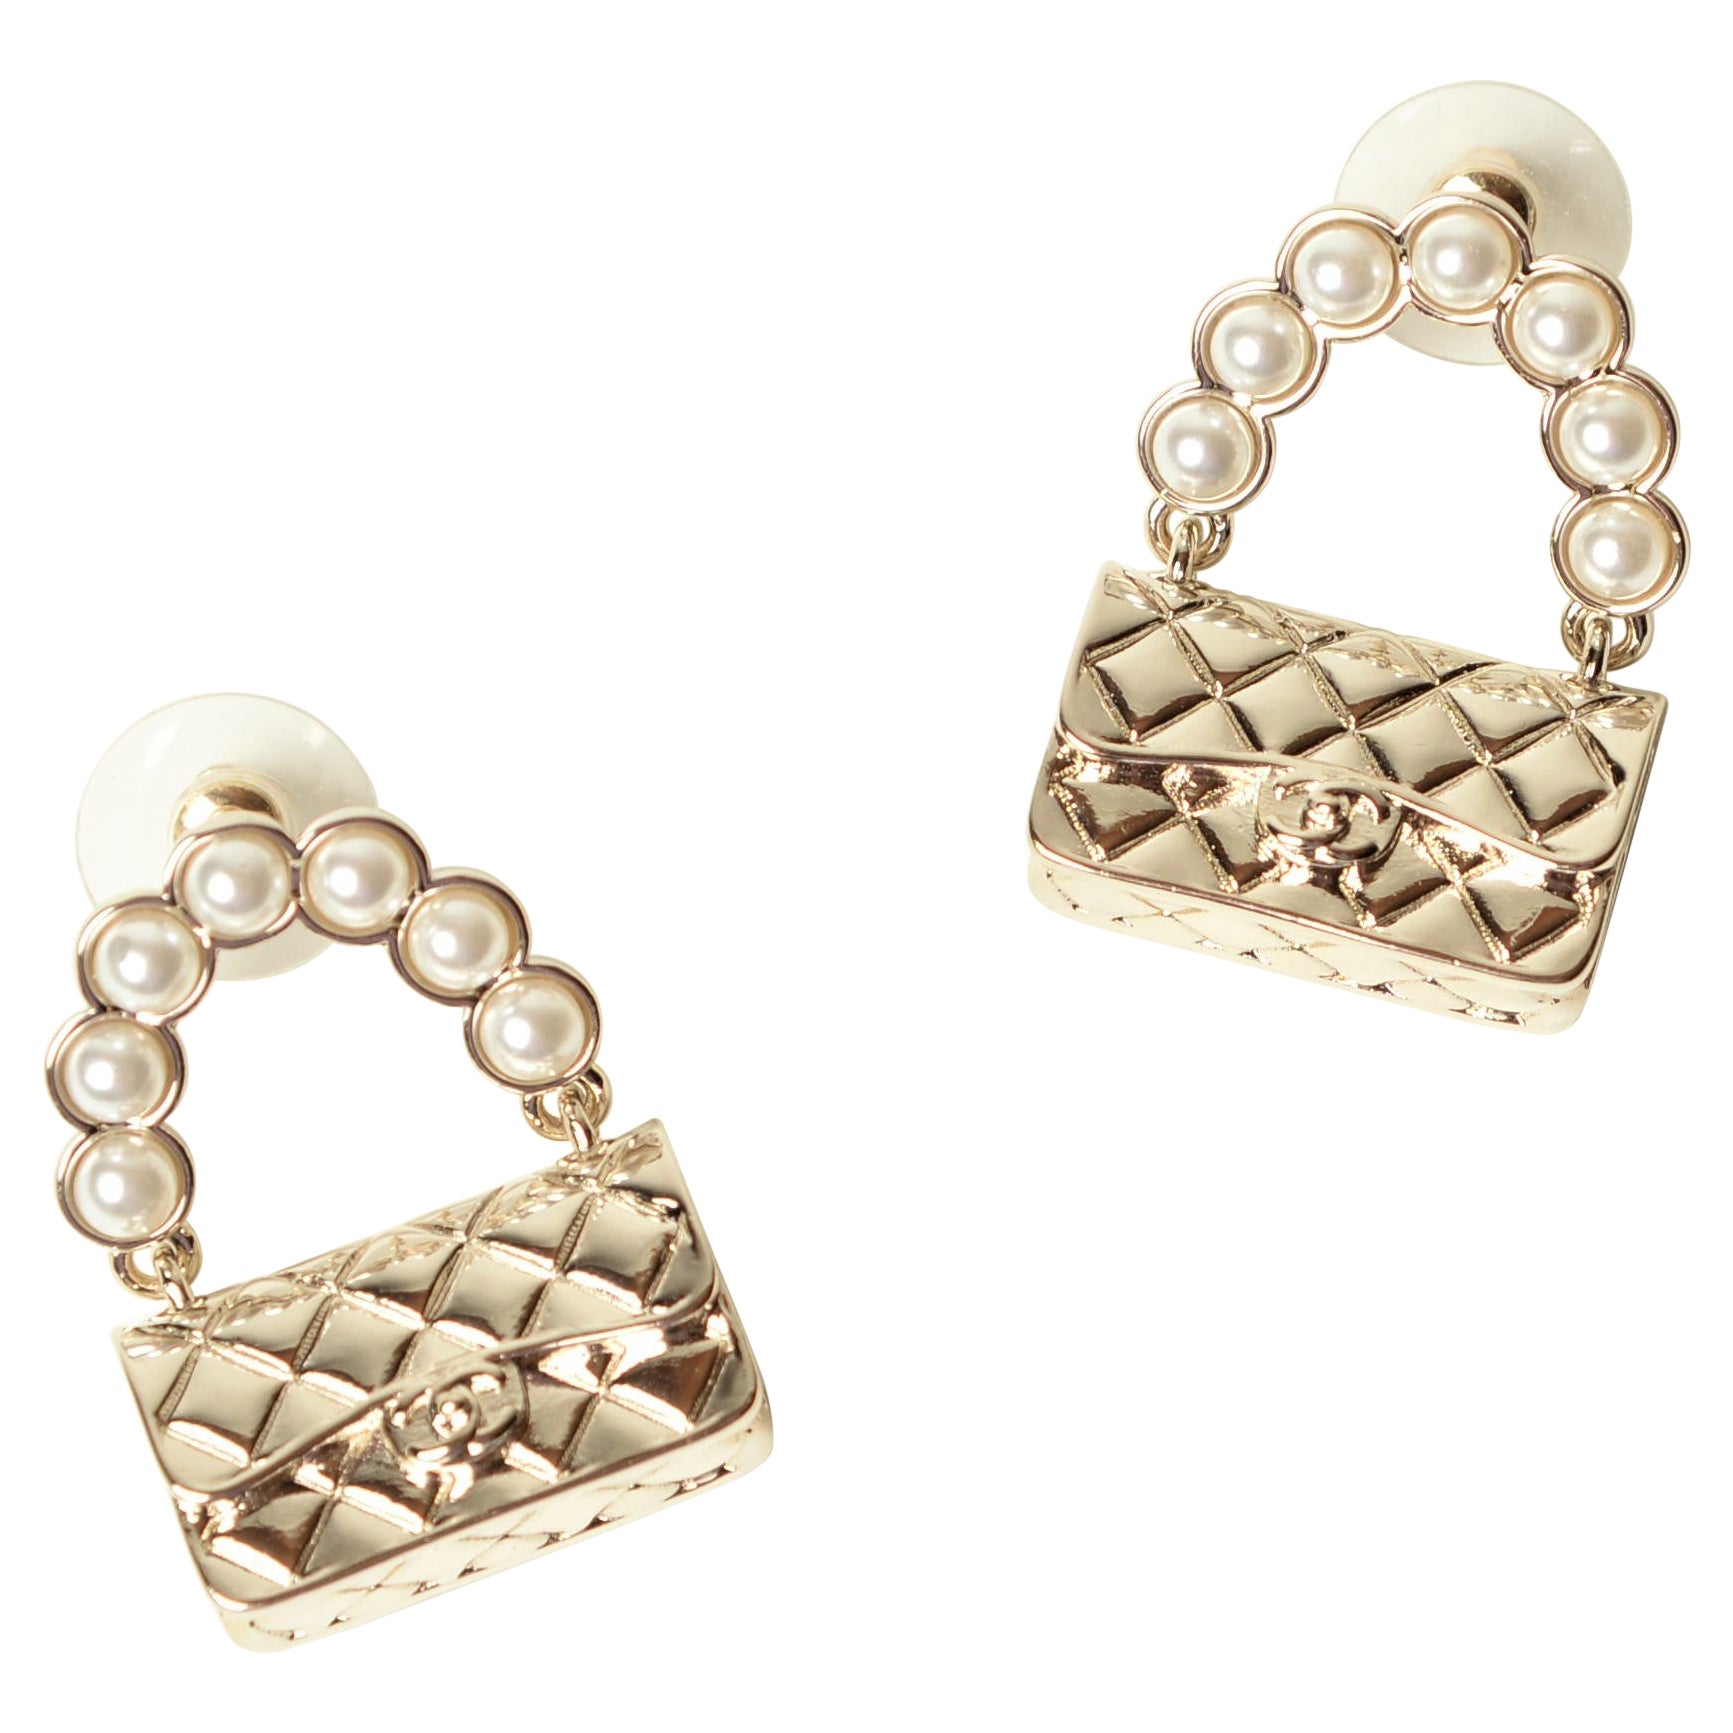 Chanel Pearl Flap Bag Champagne Metal Glass Pearls